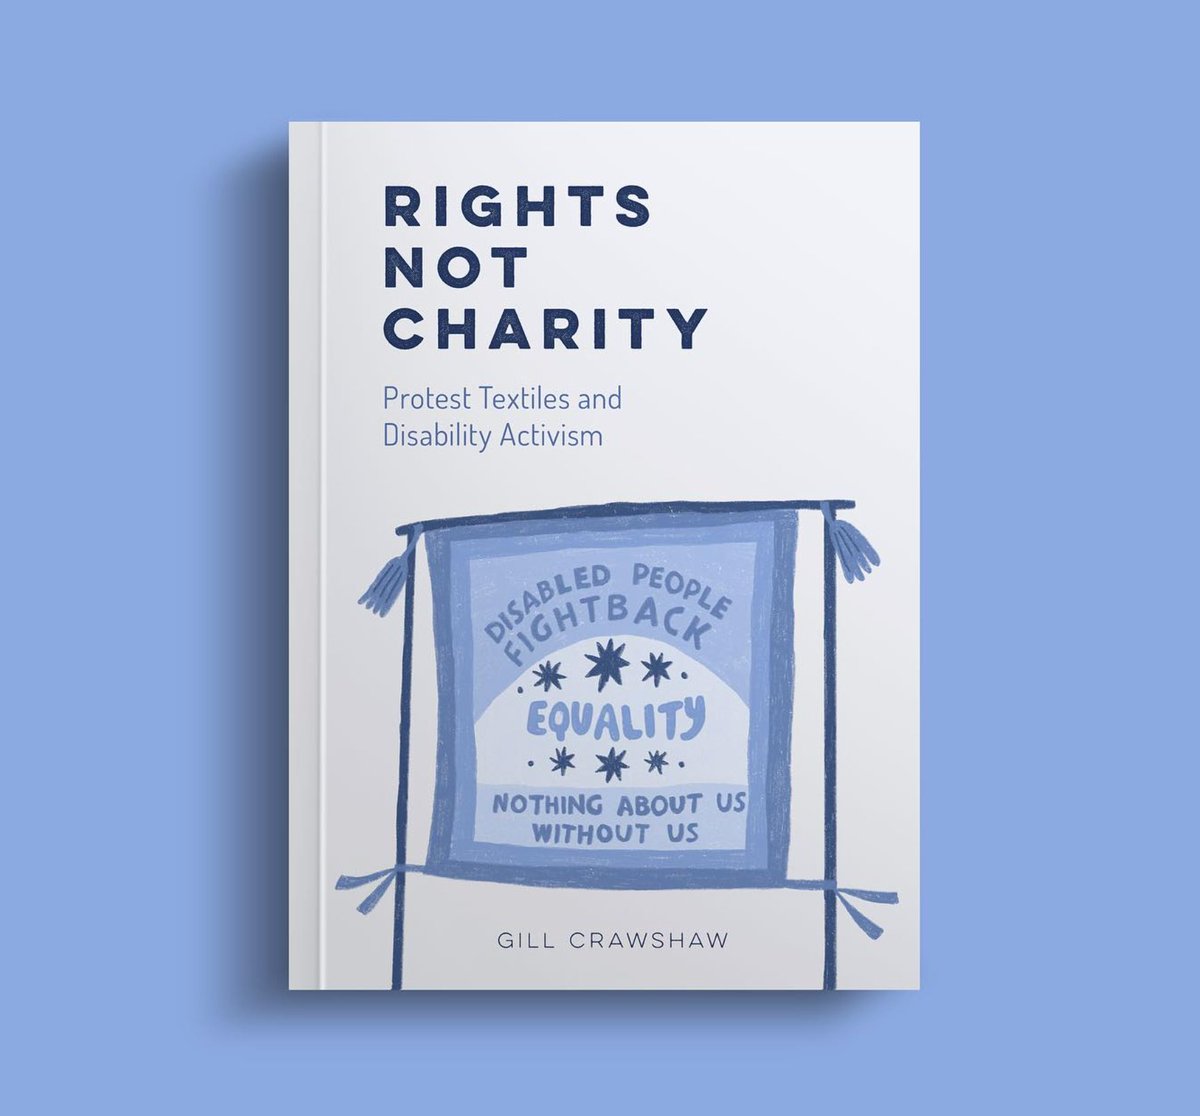 Rights Not Charity: Protest Textiles and Disability Activism by Gill Crawshaw @ShoddyArts from @commonthreadspress The new publication from Common Threads Press, looking at how textiles have long been part of the fabric of disabled people’s lives and history, available now.